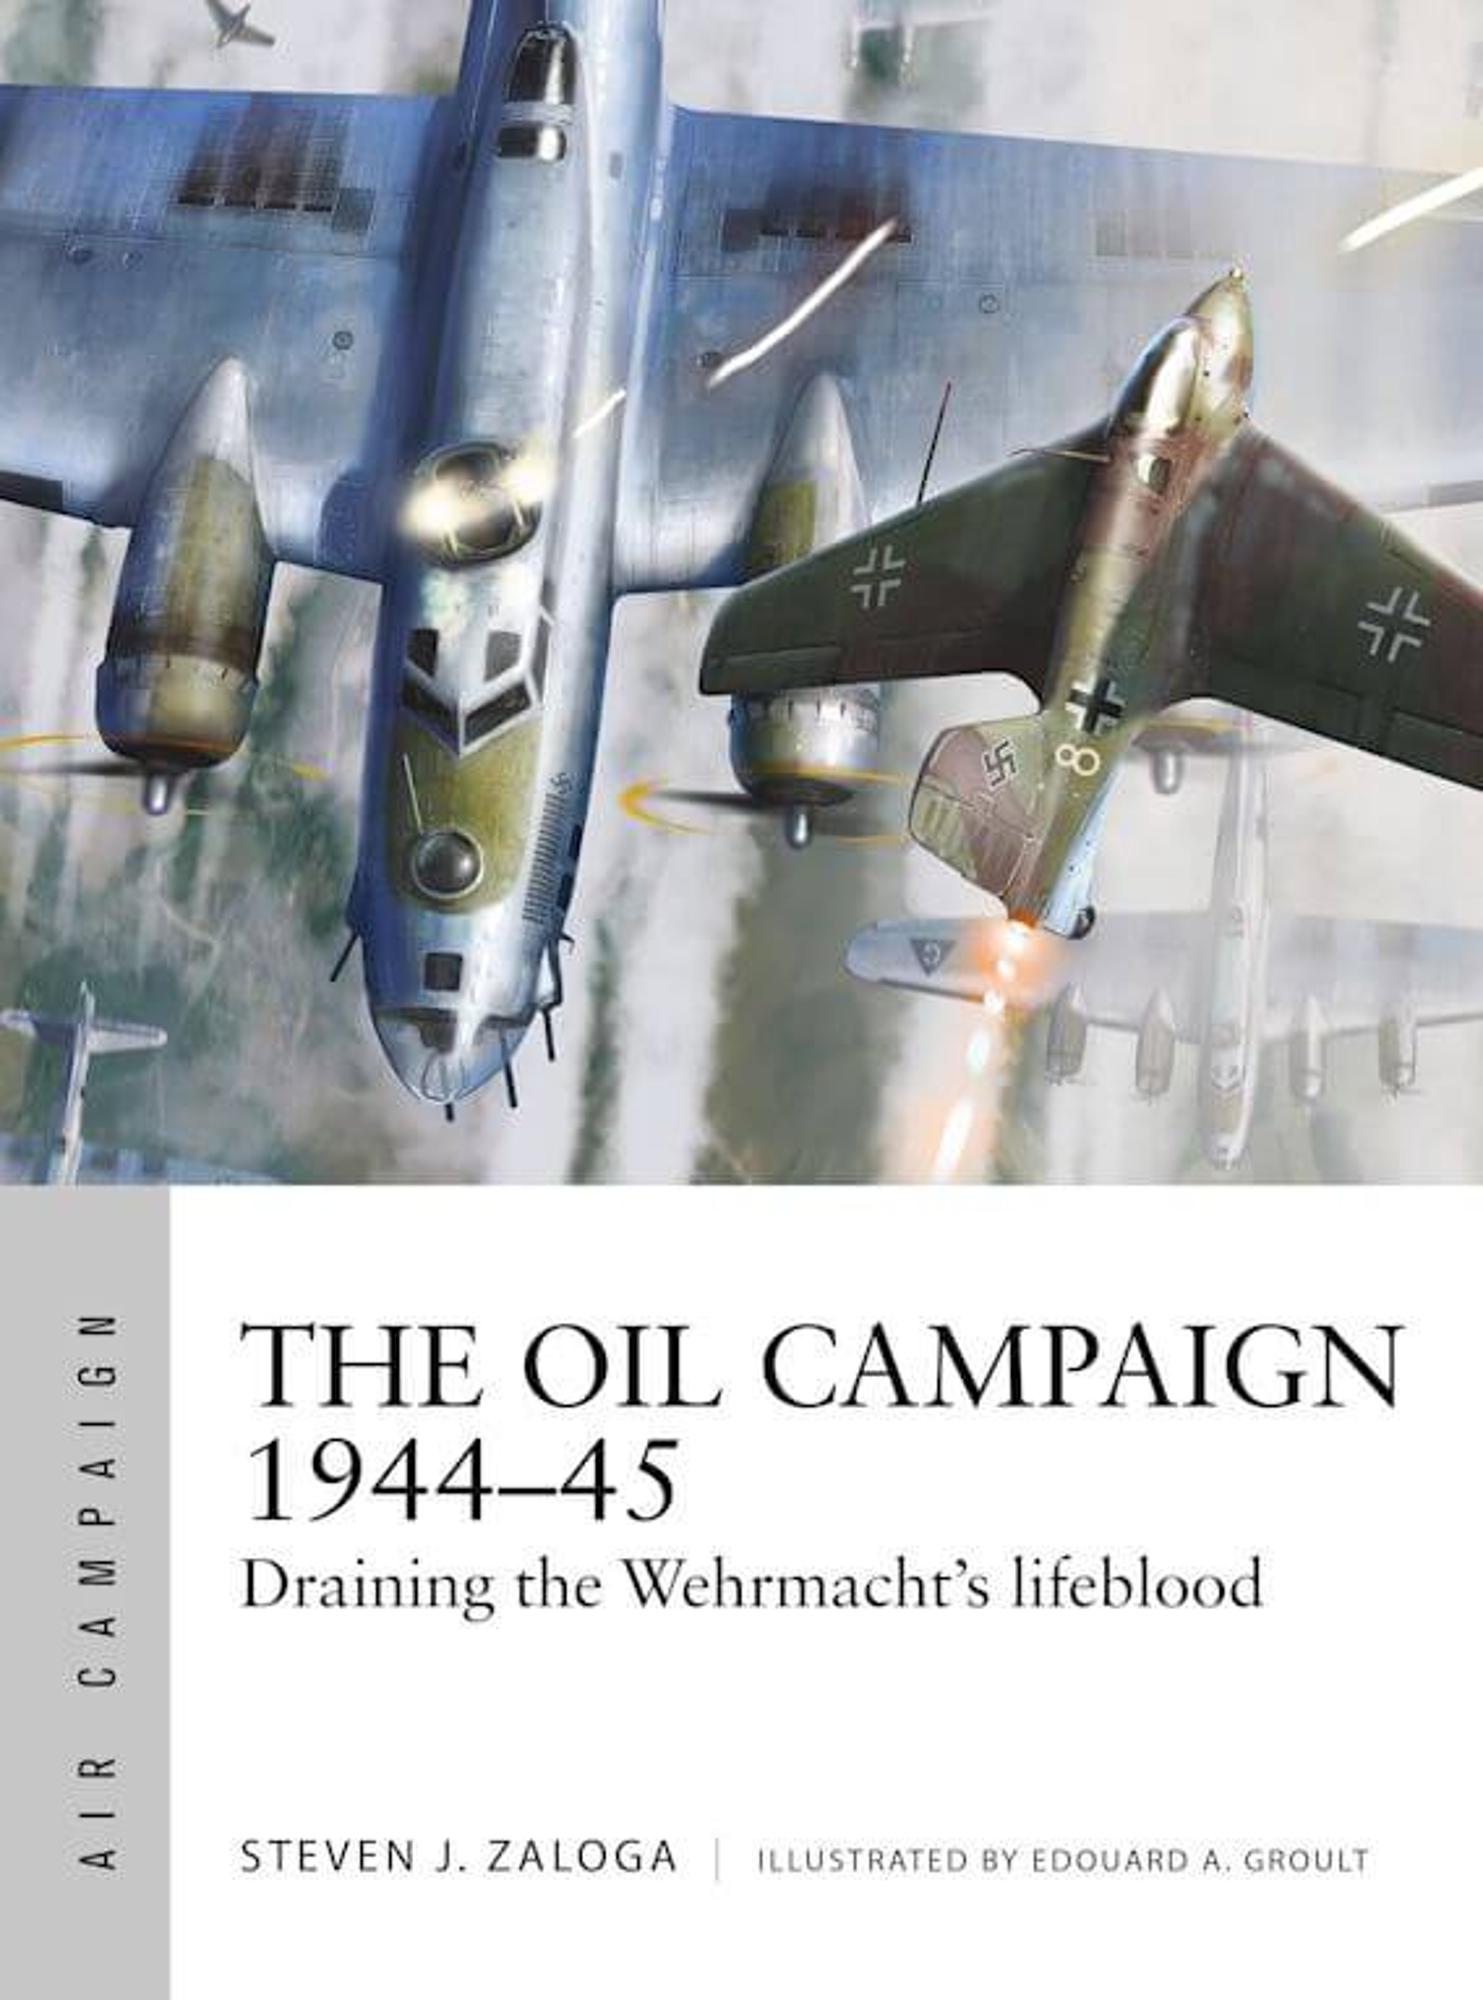 The Oil Campaign 1944-45: Draining the Wermachys lifeblood